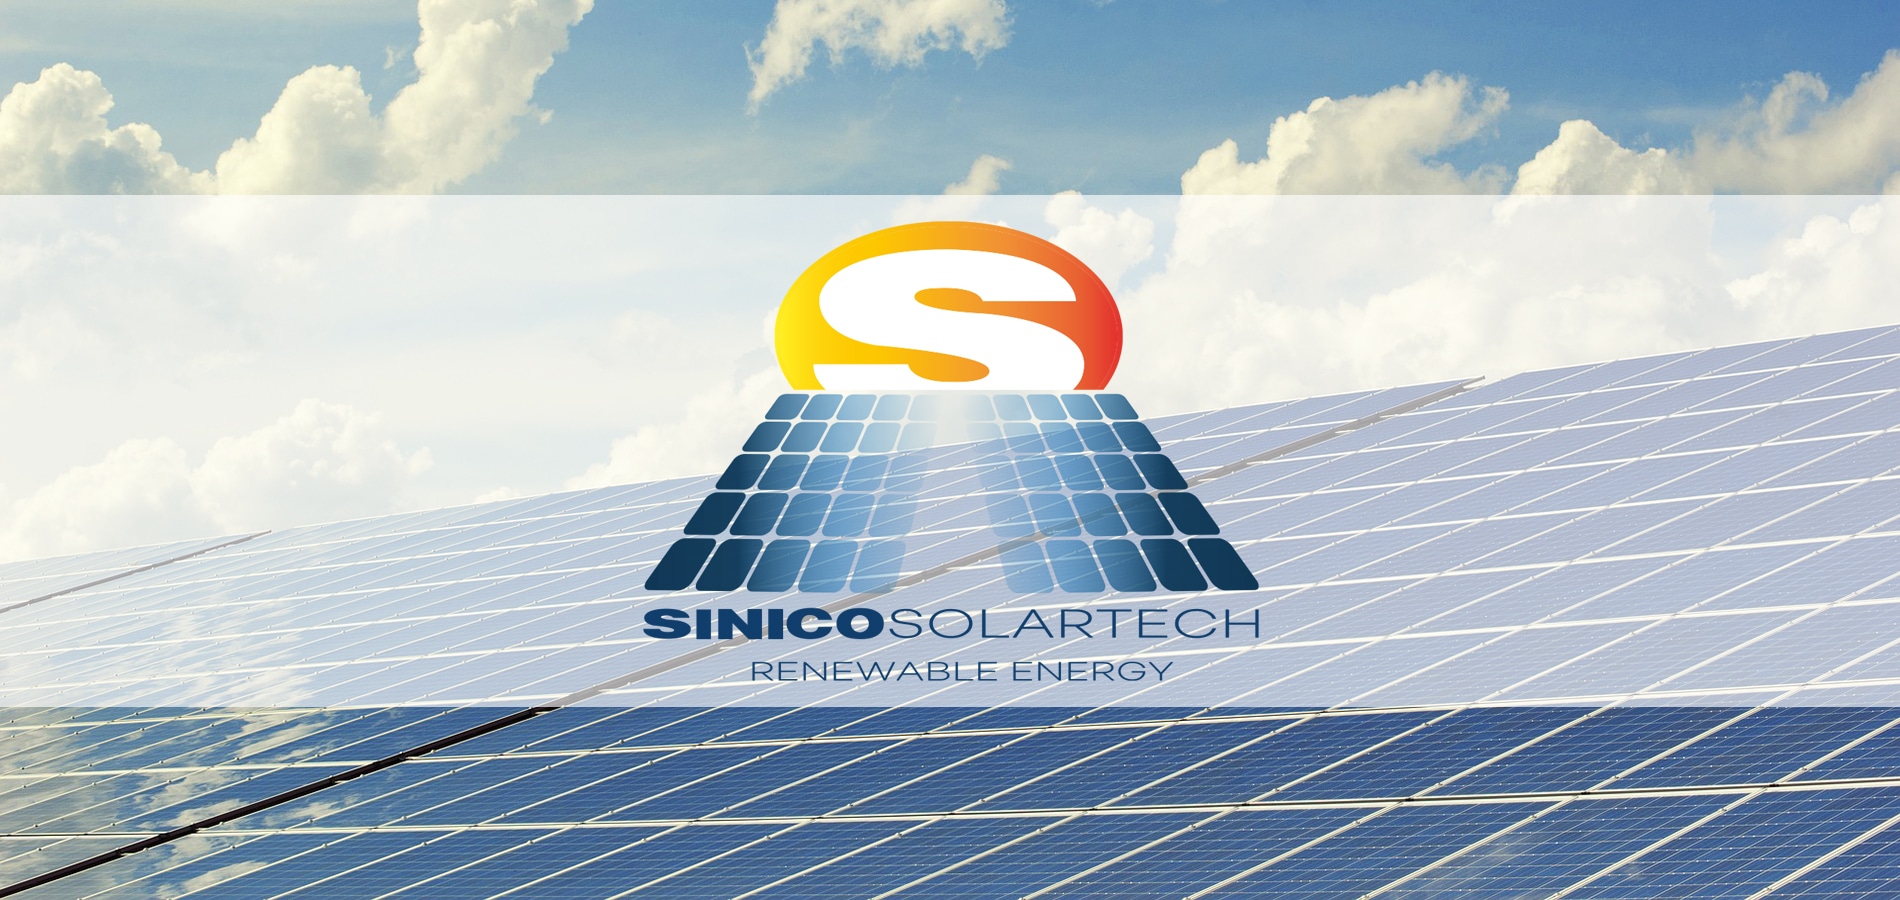 Sinico covers itself with the sun